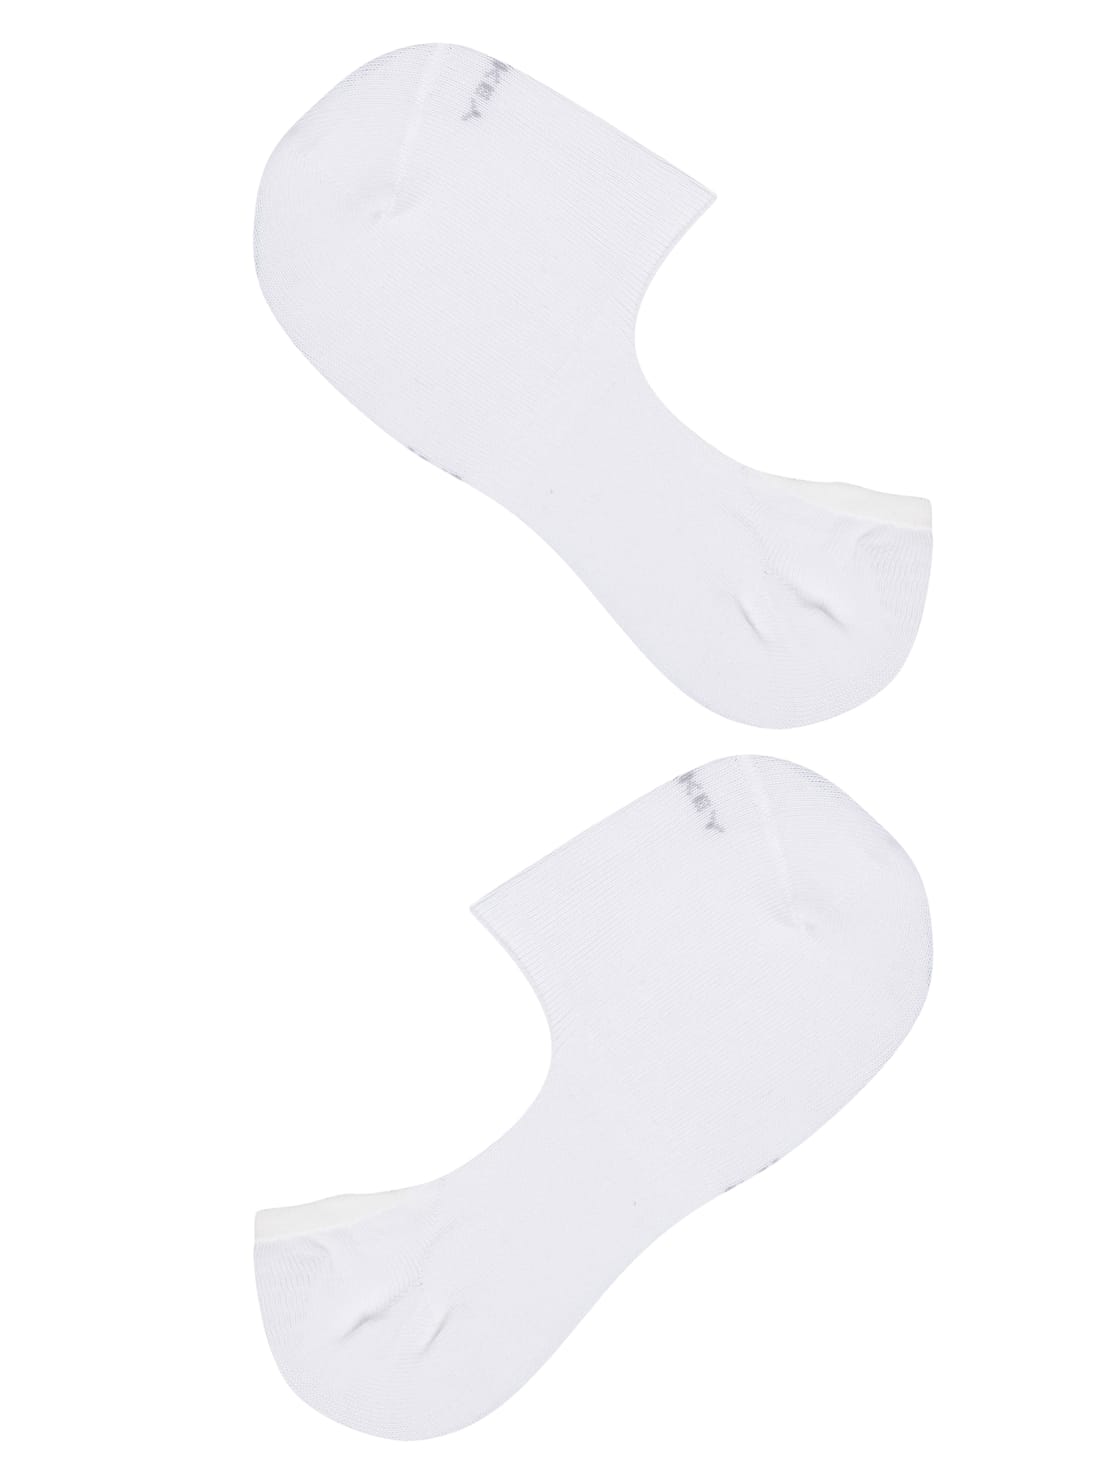 Buy Women's Microfiber and Compact Cotton Stretch No Show Socks with ...